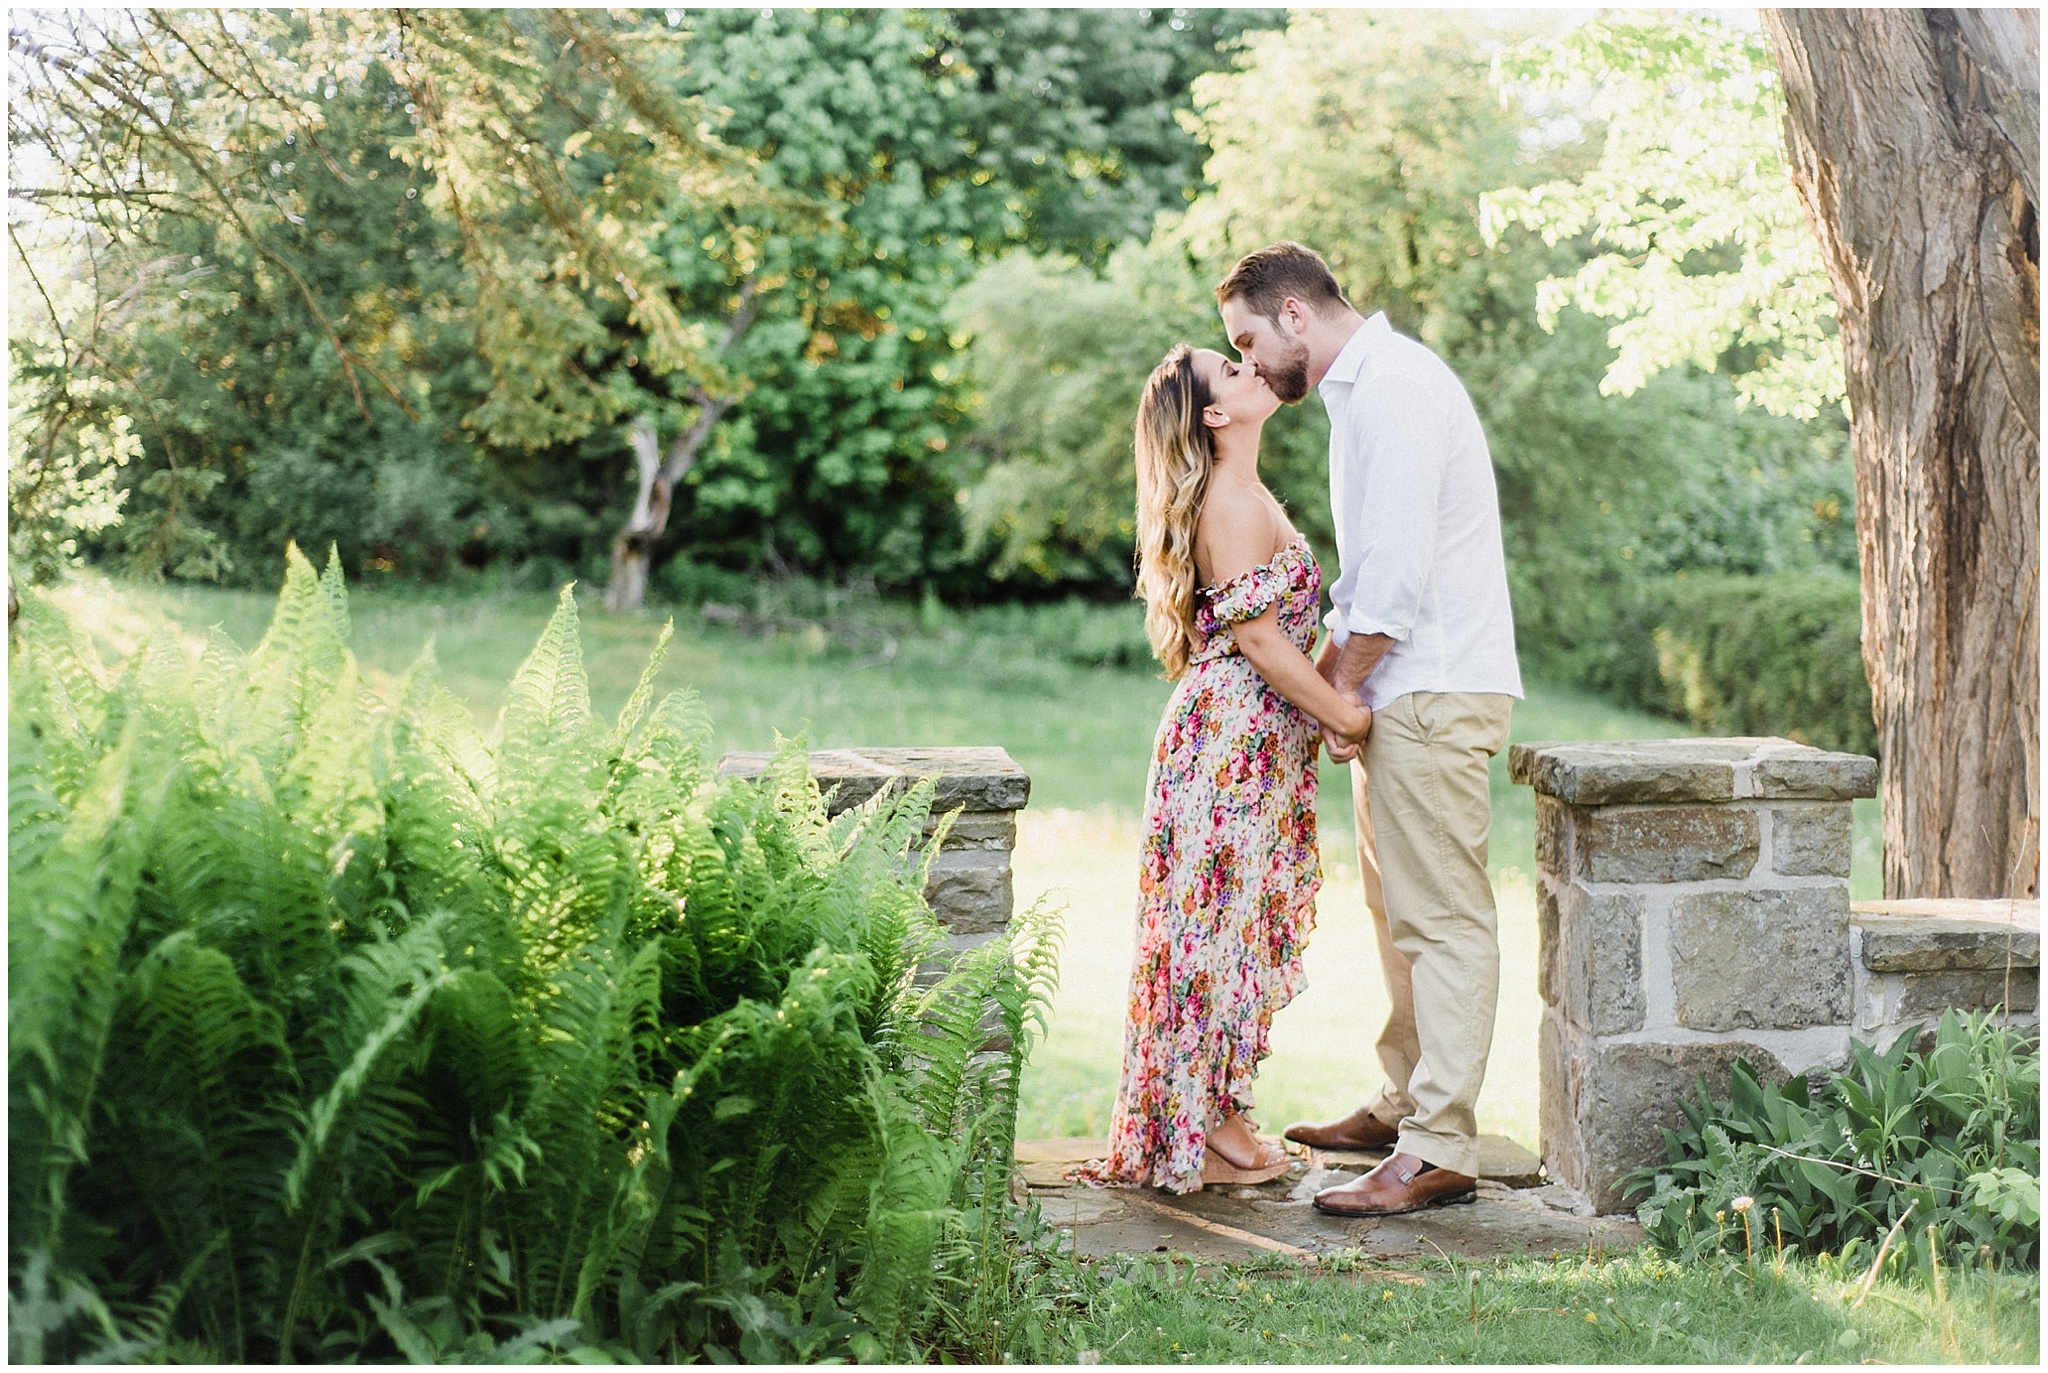 Scotsdale Farm Engagement Session in Georgetown, Ontario by Jenn Kavanagh Photography